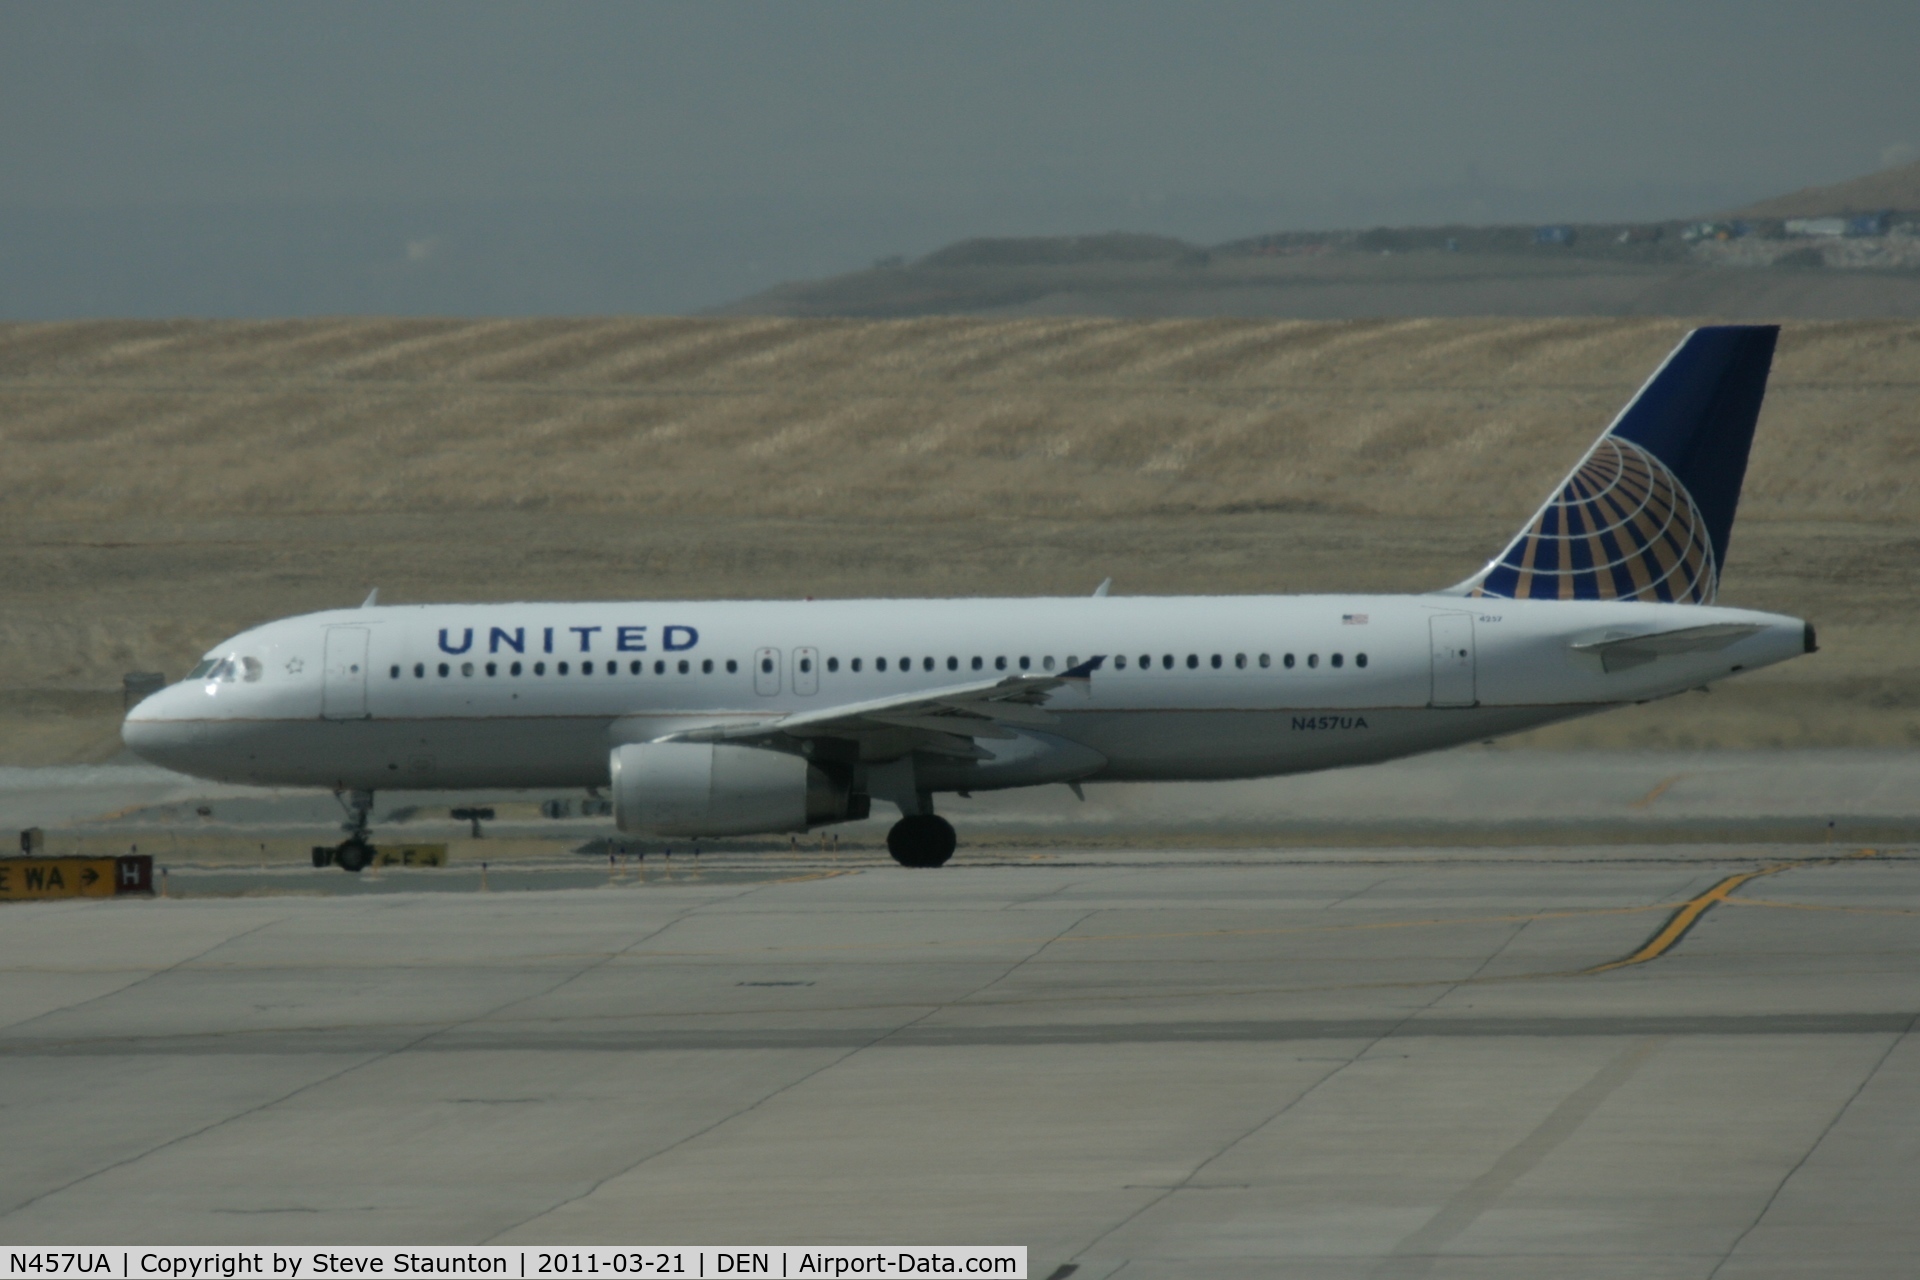 N457UA, 1999 Airbus A320-232 C/N 1146, Taken at Denver International Airport, in March 2011 whilst on an Aeroprint Aviation tour